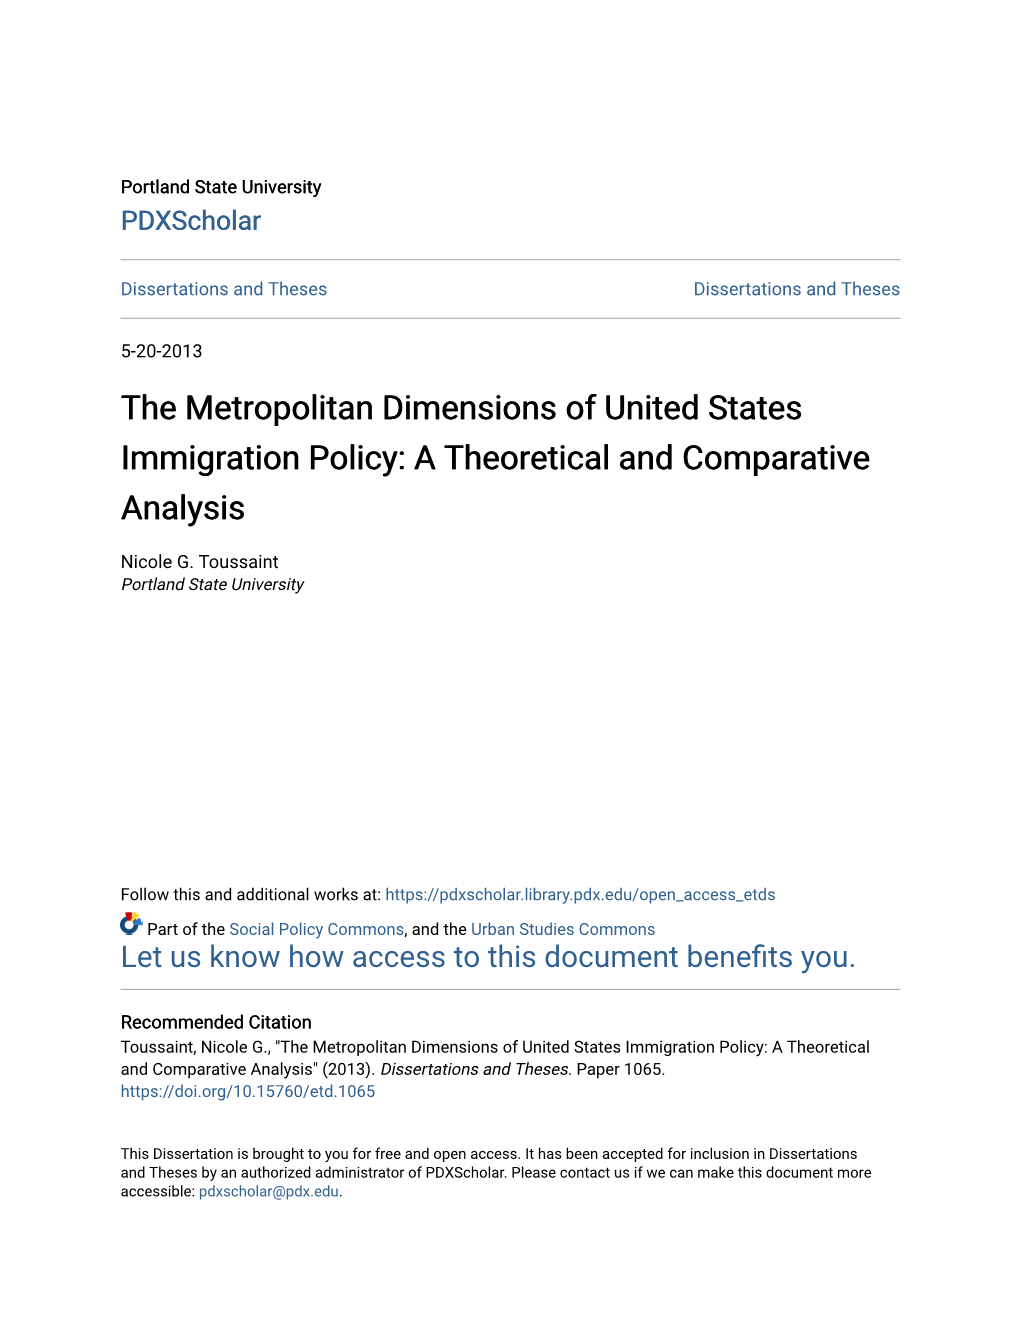 The Metropolitan Dimensions of United States Immigration Policy: a Theoretical and Comparative Analysis